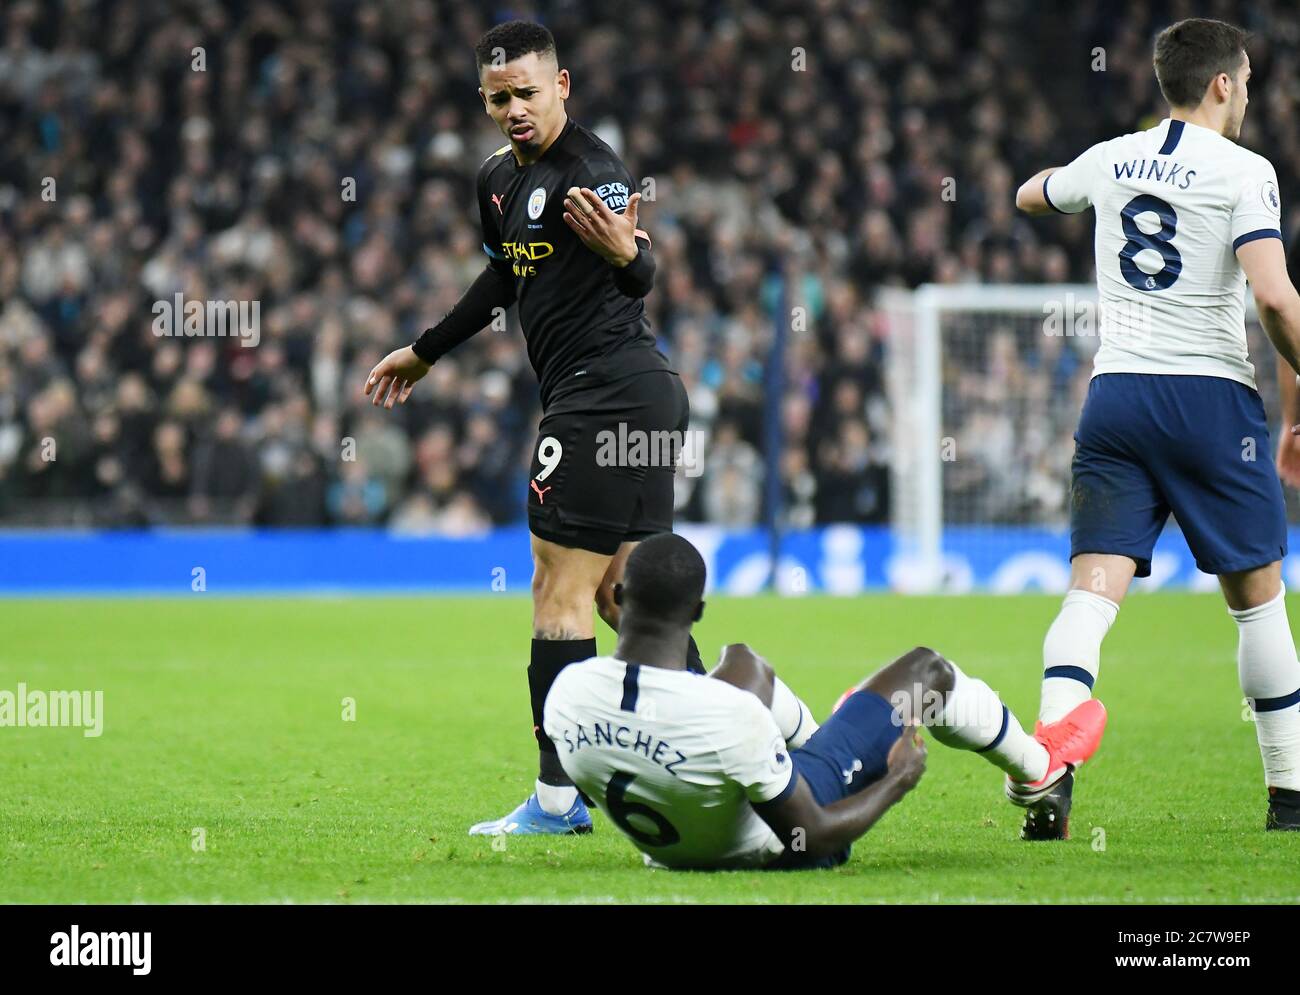 LONDON, ENGLAND - FEBRUARY 2, 2020: Gabriel Jesus of City pictured during the 2019/20 Premier League game between Tottenham Hotspur and Manchester City at Tottenham Hotspur Stadium. Stock Photo